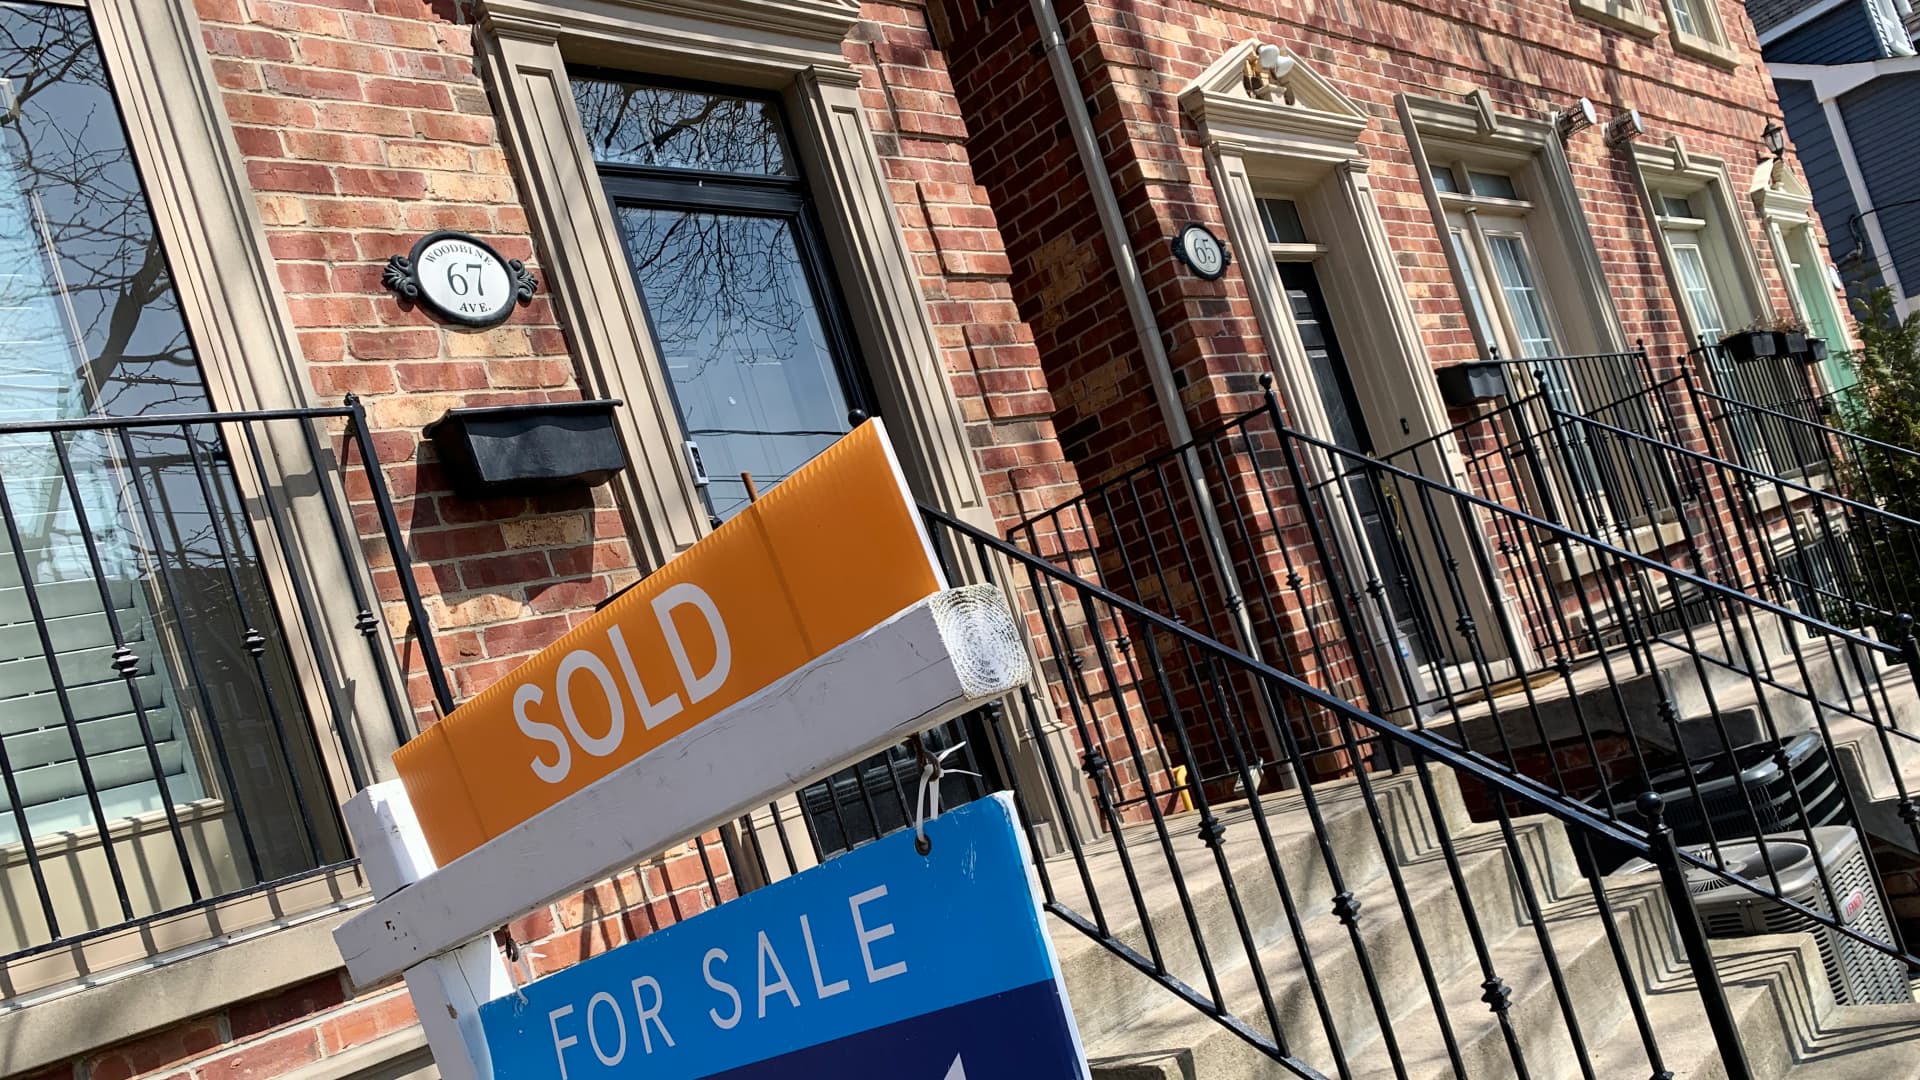 Home prices surged in March as interest rates also rose: S&P Case-Shiller